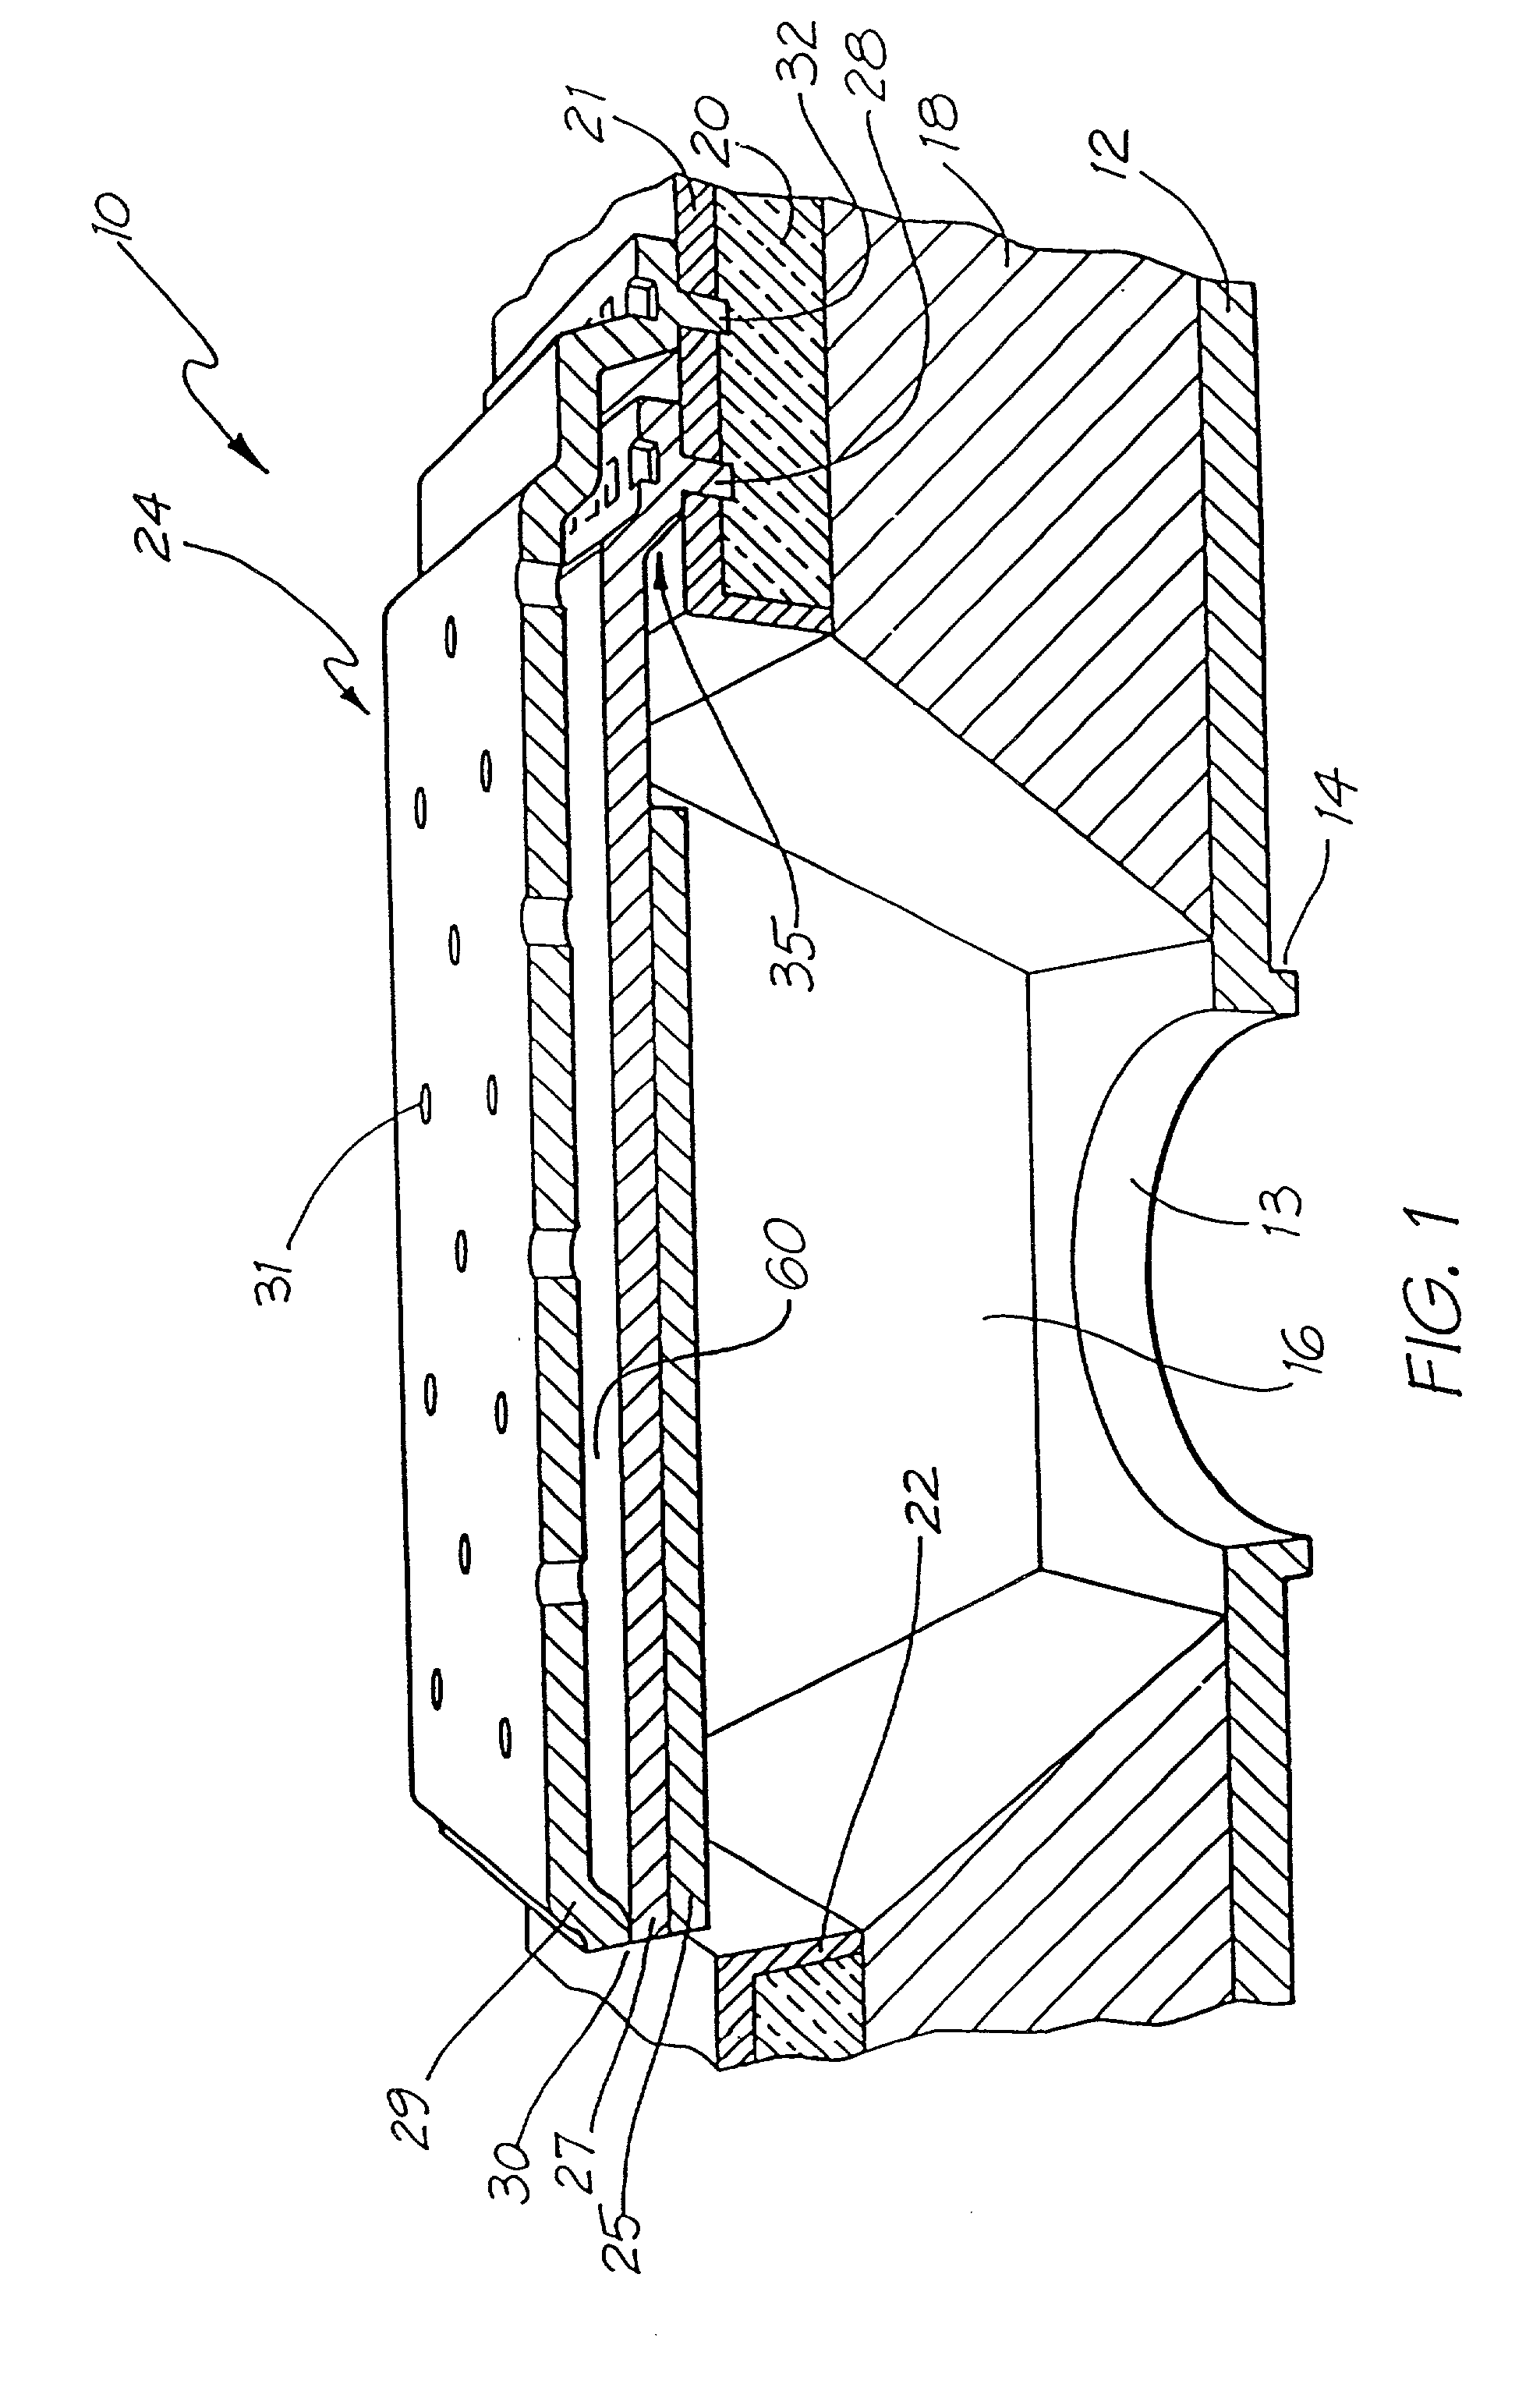 Ink jet mechanism with thermoelastic bend actuator having conductive and resistive beams